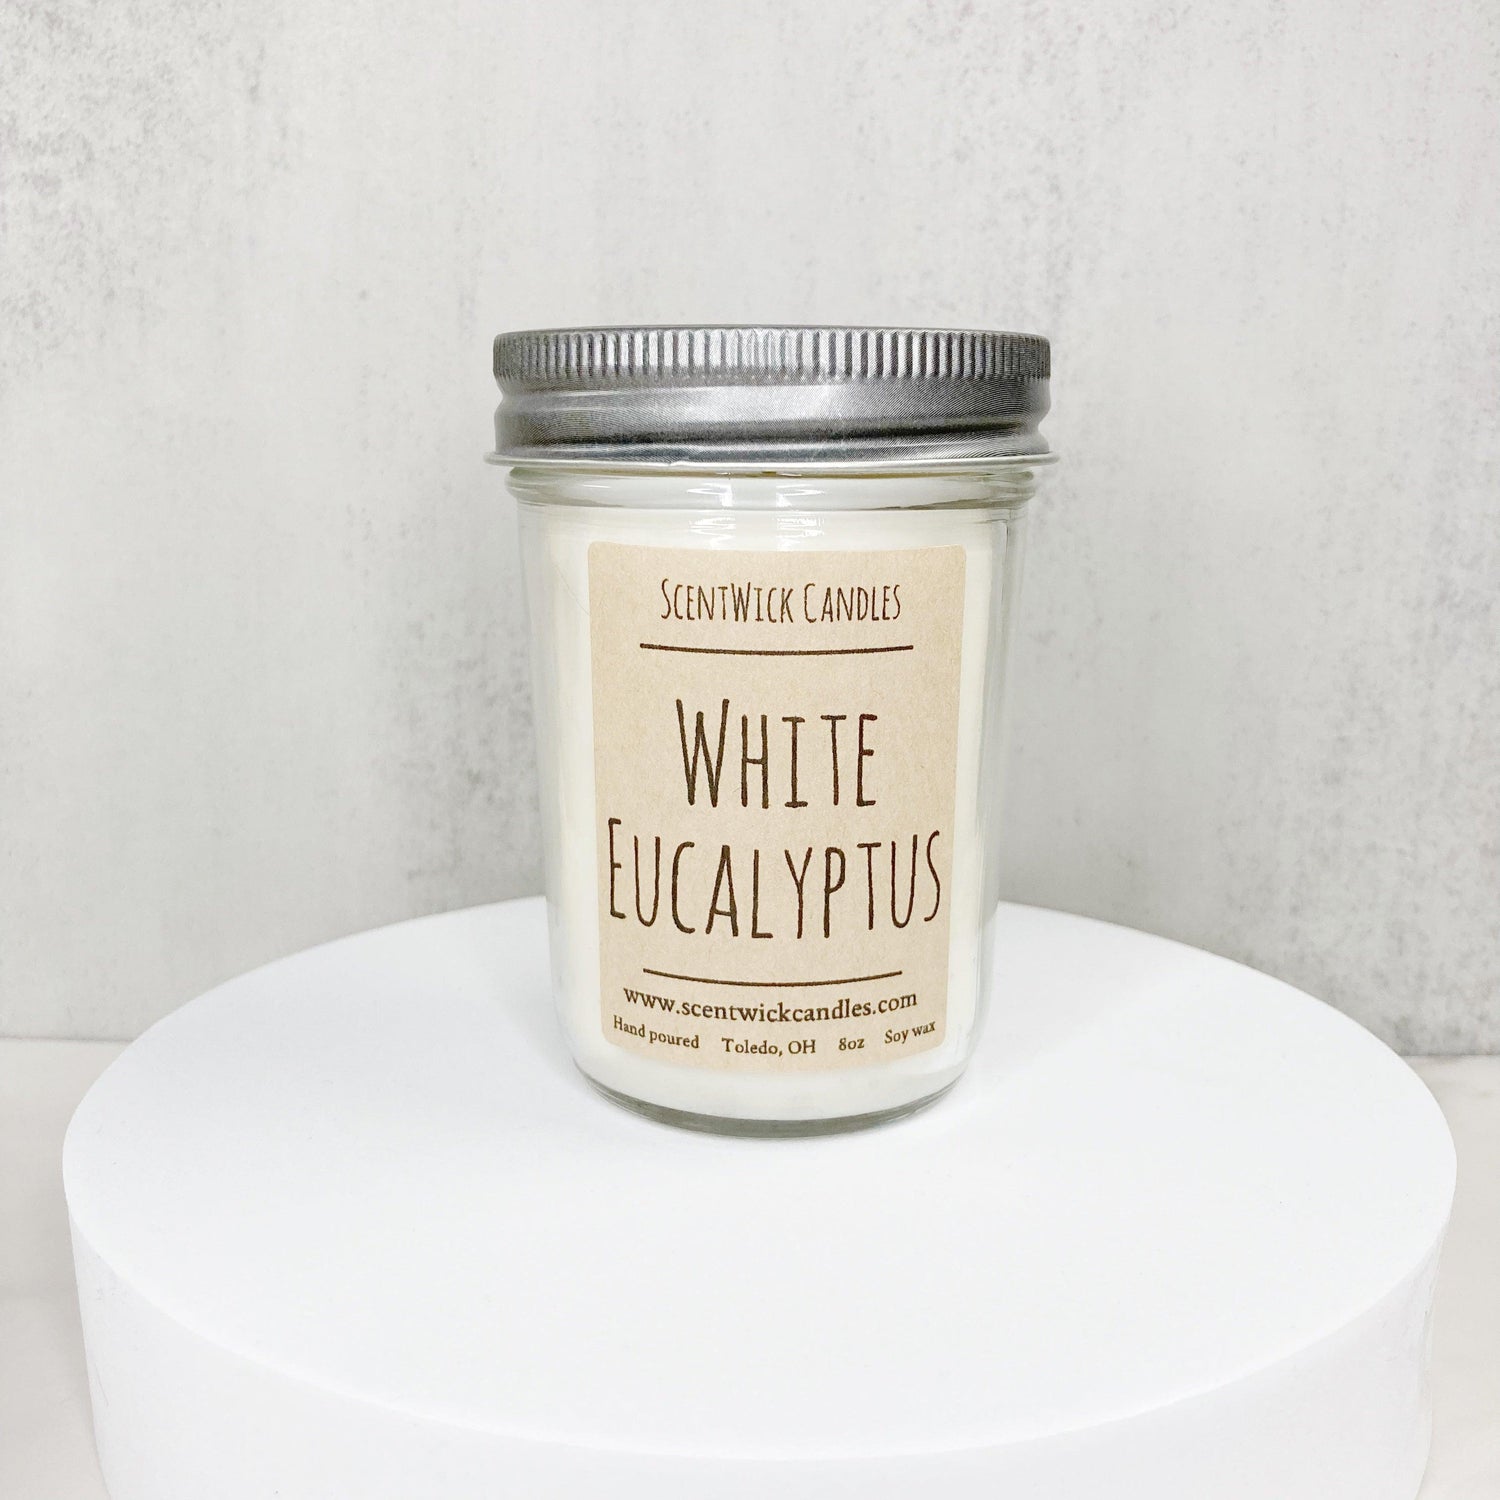 White Eucalyptus Candle - ScentWick Candles